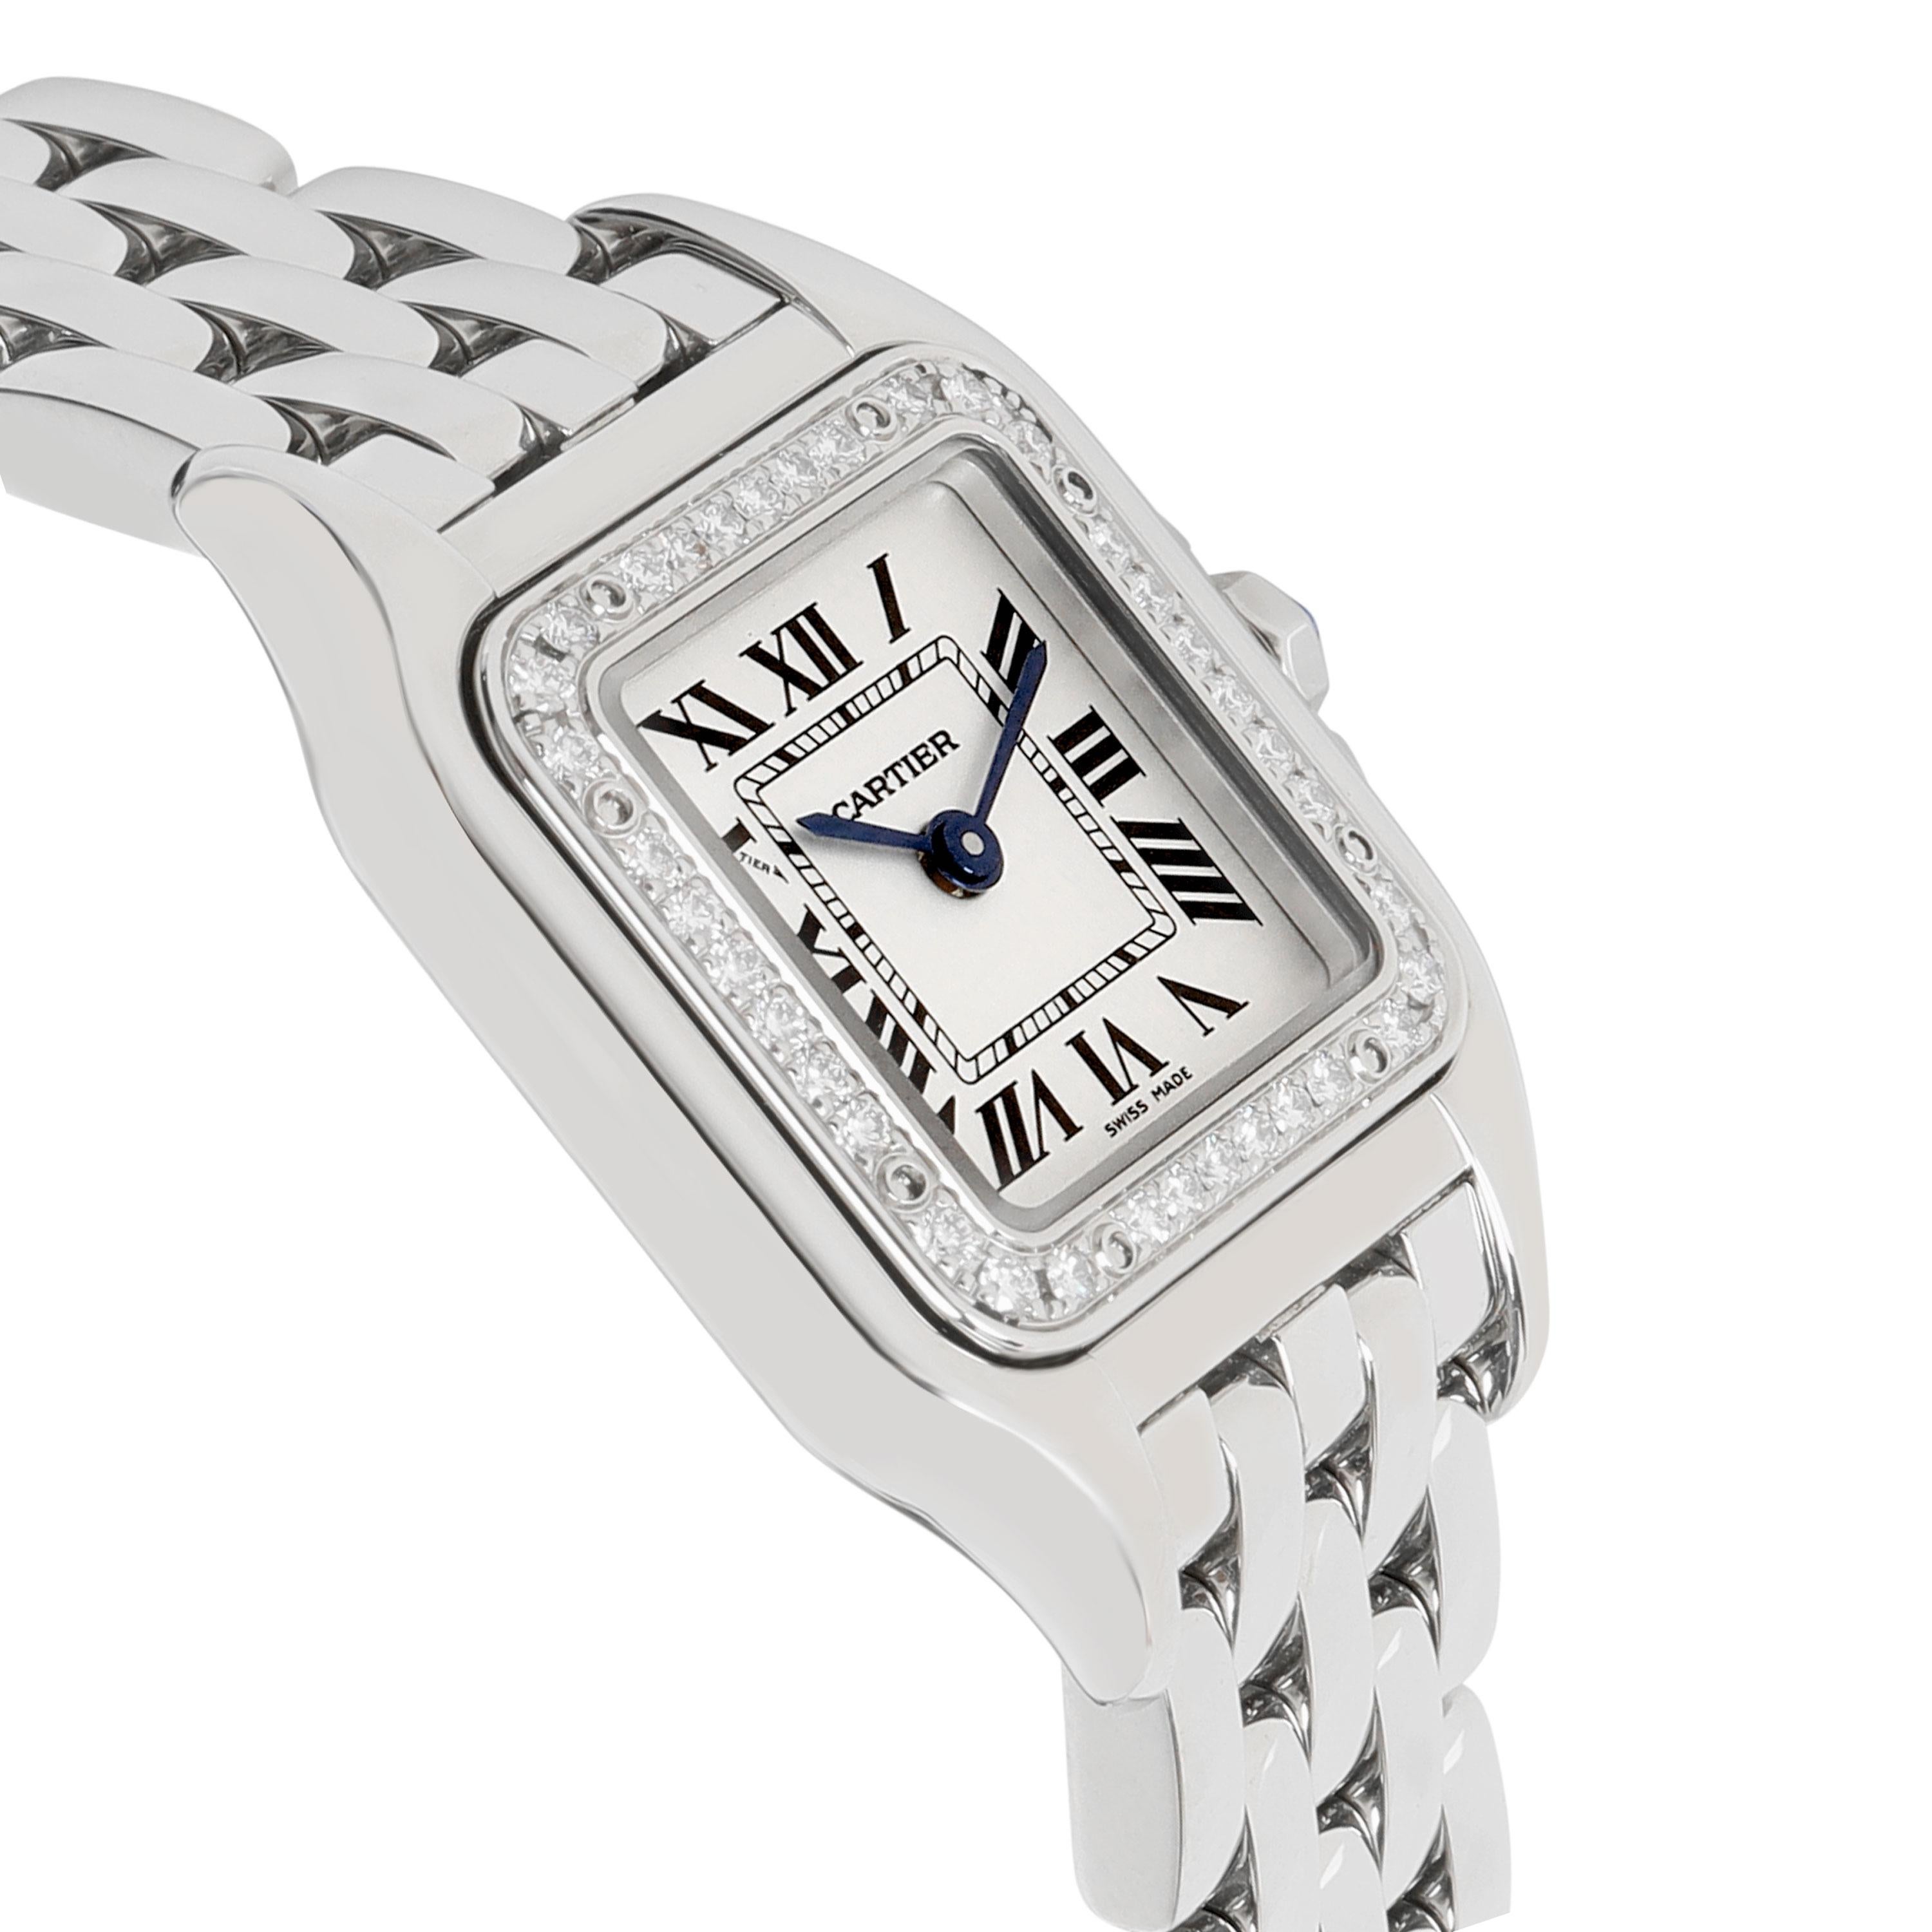 Cartier Panthere W4PN0007 Women's Watch in Stainless Steel 1